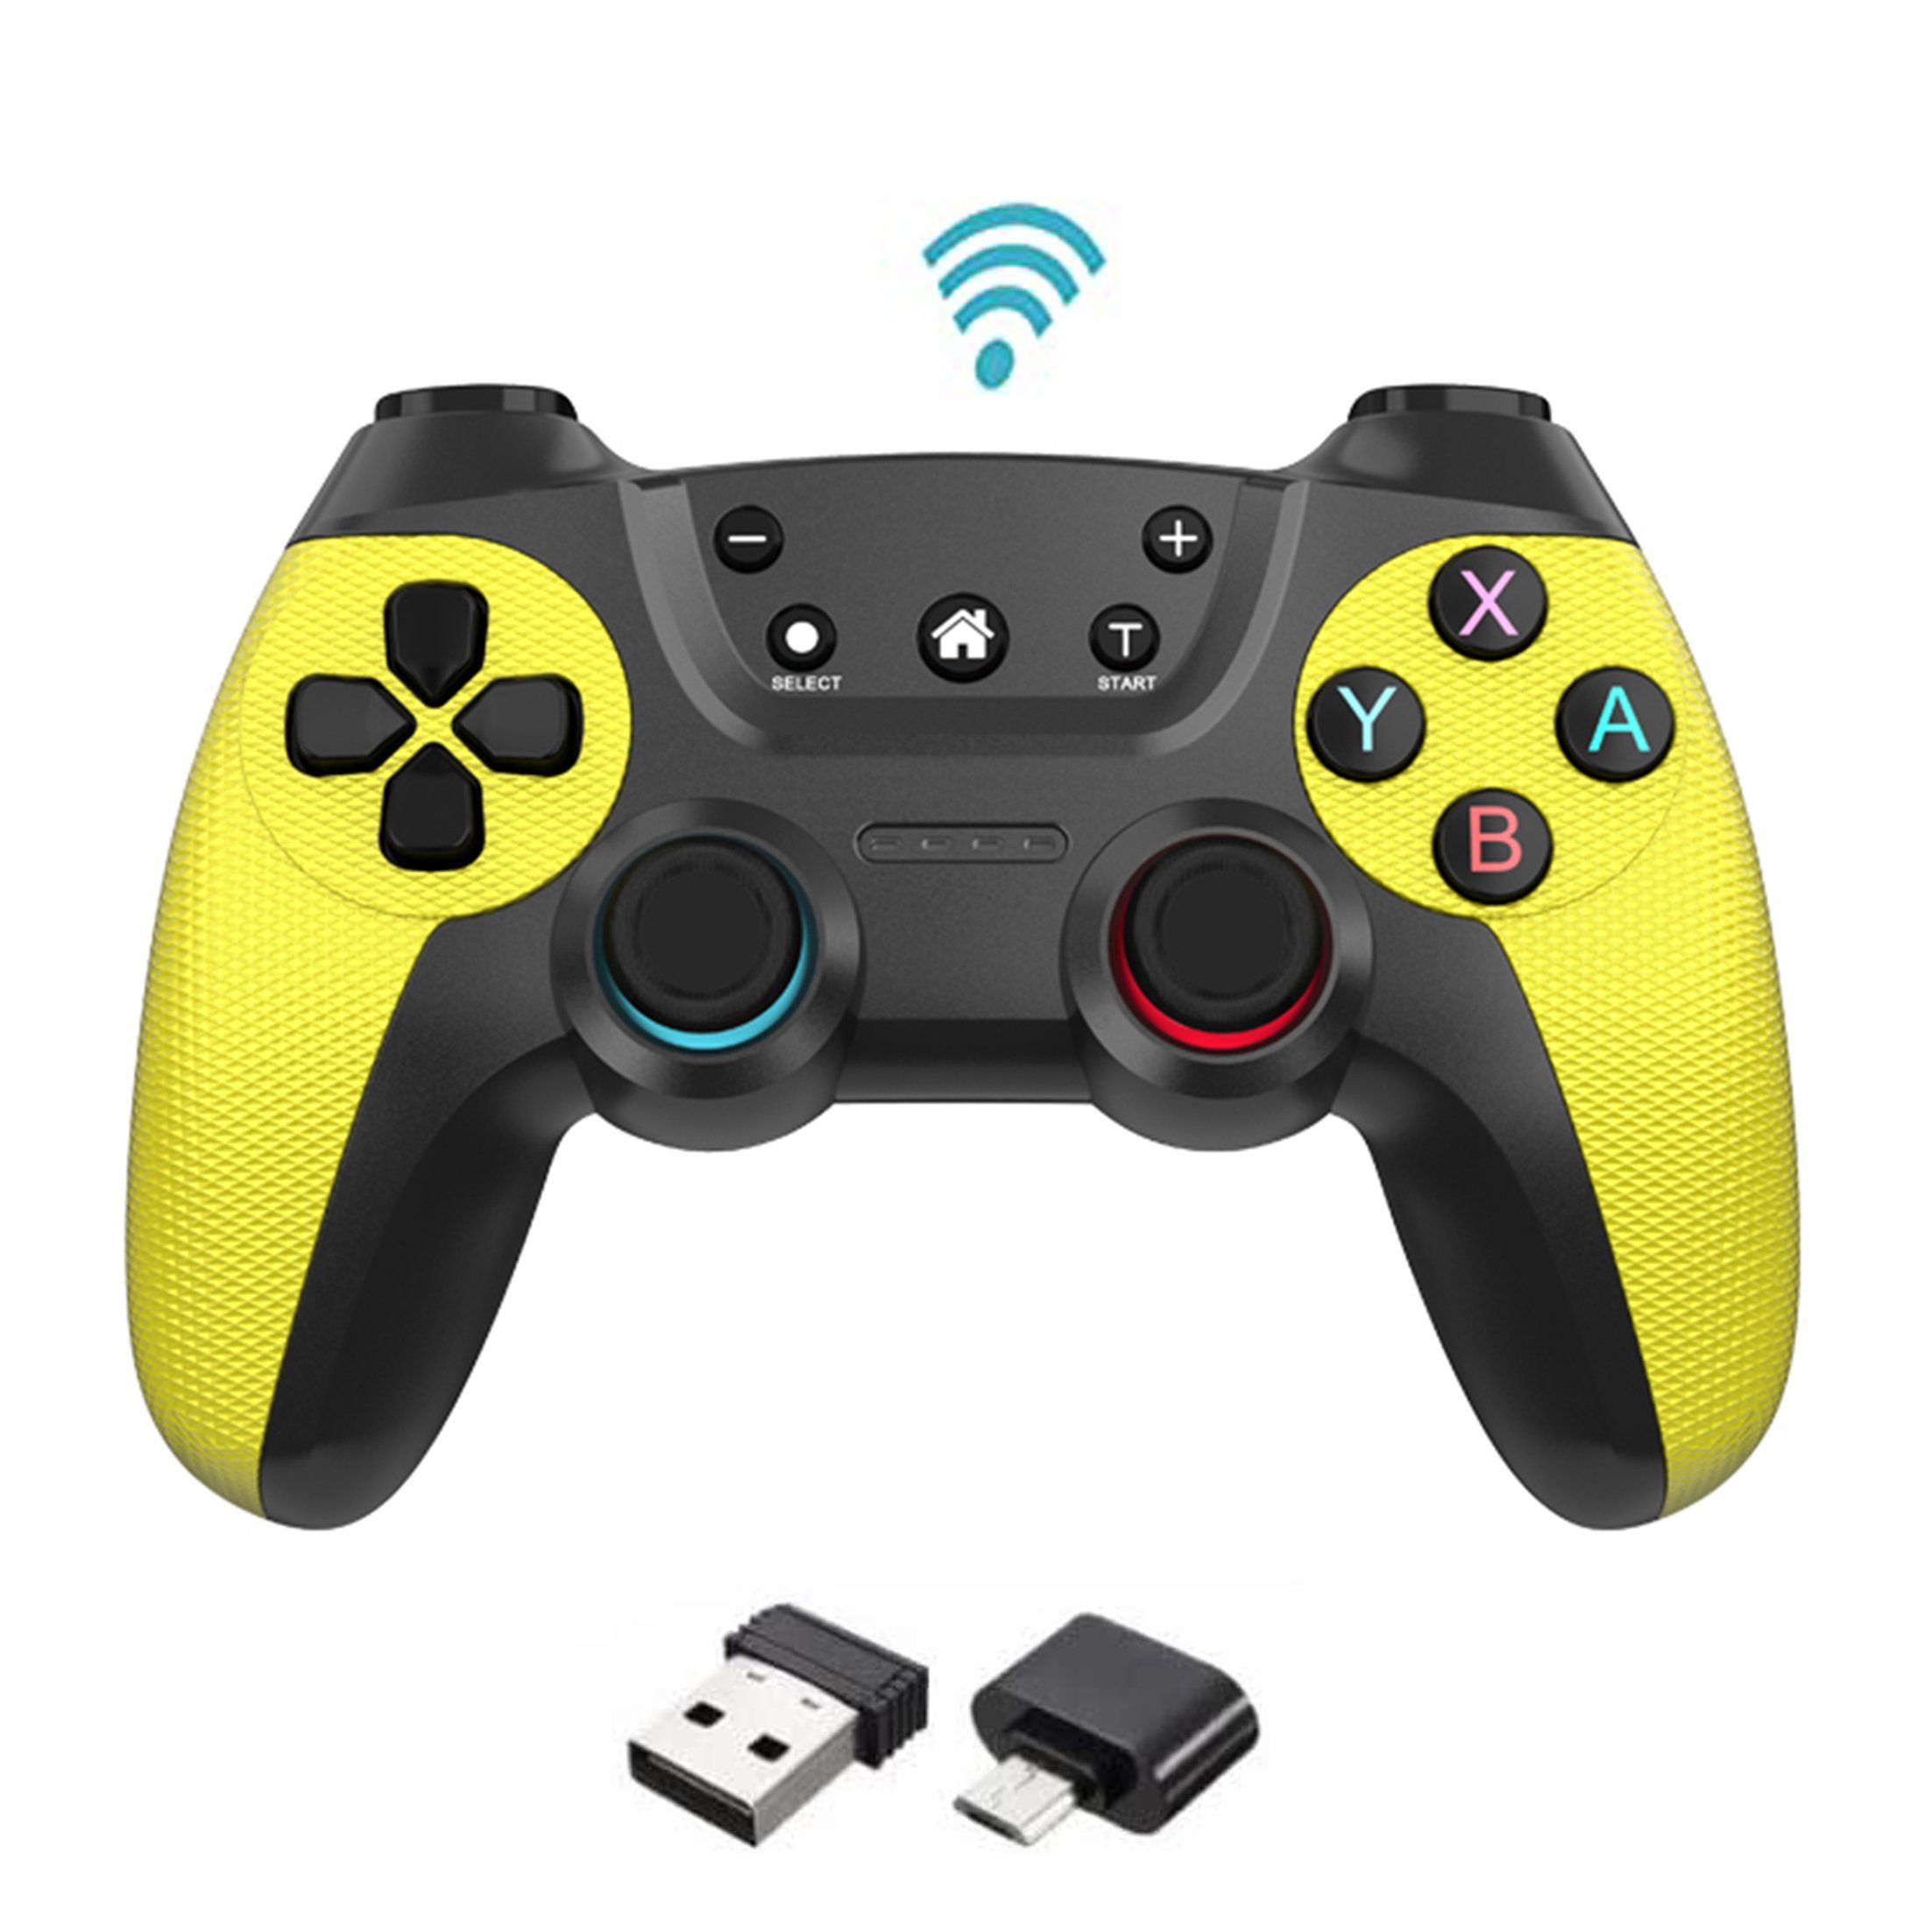 Tadow Android Gamepad,Gamecontroller,2.4G drahtlose Übertragung,Wireless Gamepad (für Android/PC/PS2/PS3/Switch)